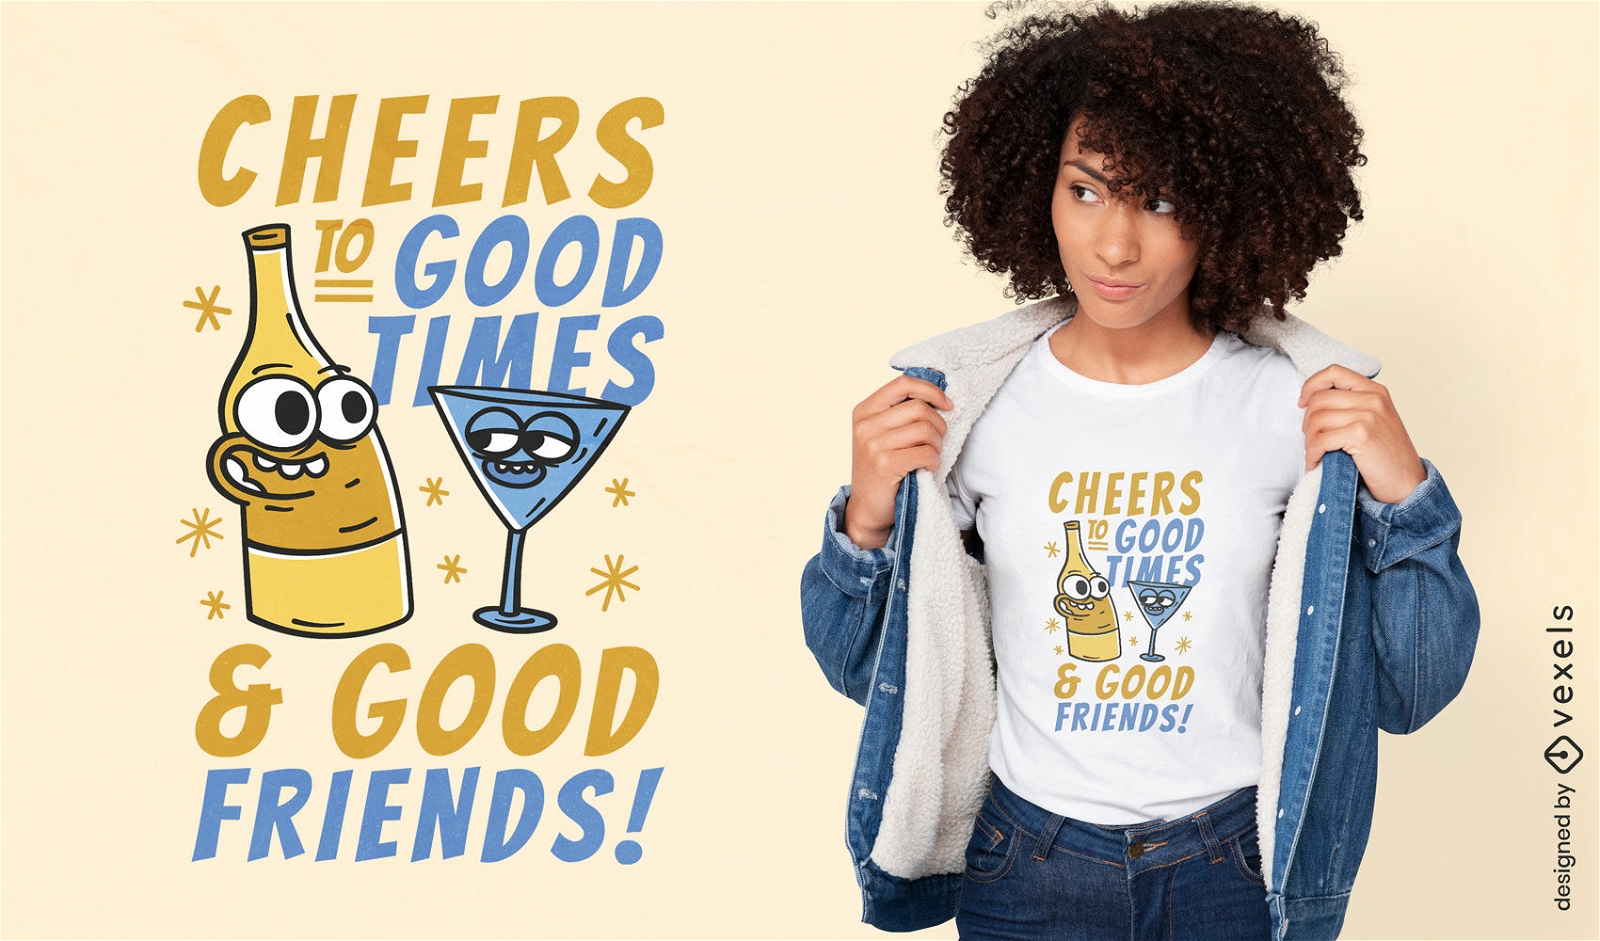 Cheers with drinks characters t-shirt design